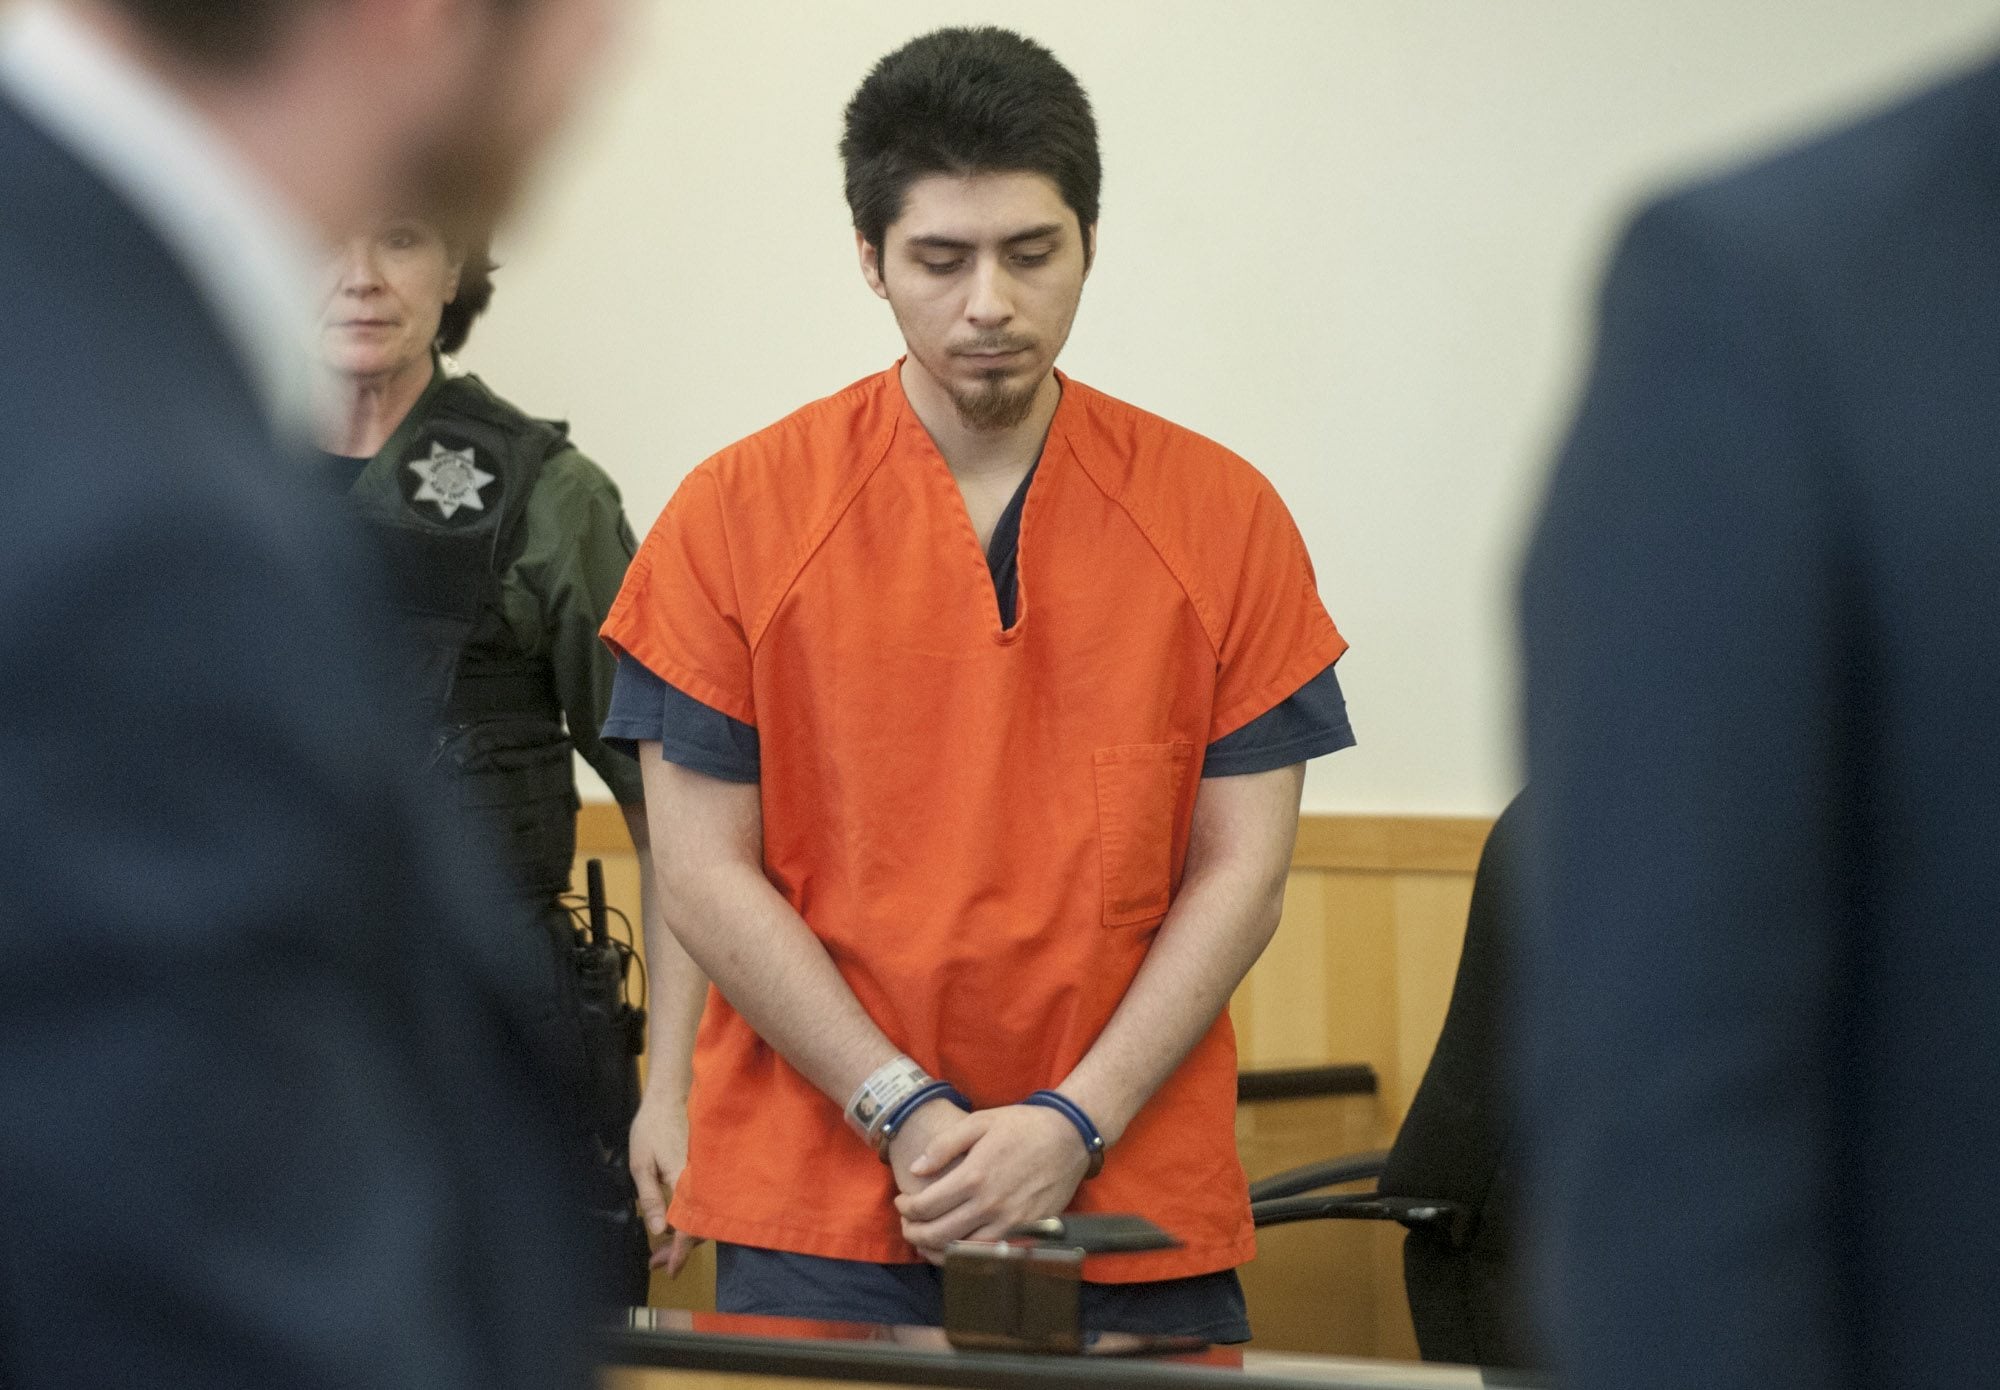 Robert Lewis Souza appears in Clark County Superior Court on Feb. 19 to enter guilty pleas to attempted second-degree murder. He was sentenced Friday to more than 15 years in prison for crashing his vehicle in March 2015 in an attempt to kill his girlfriend and 2-year-old son, who were passengers.